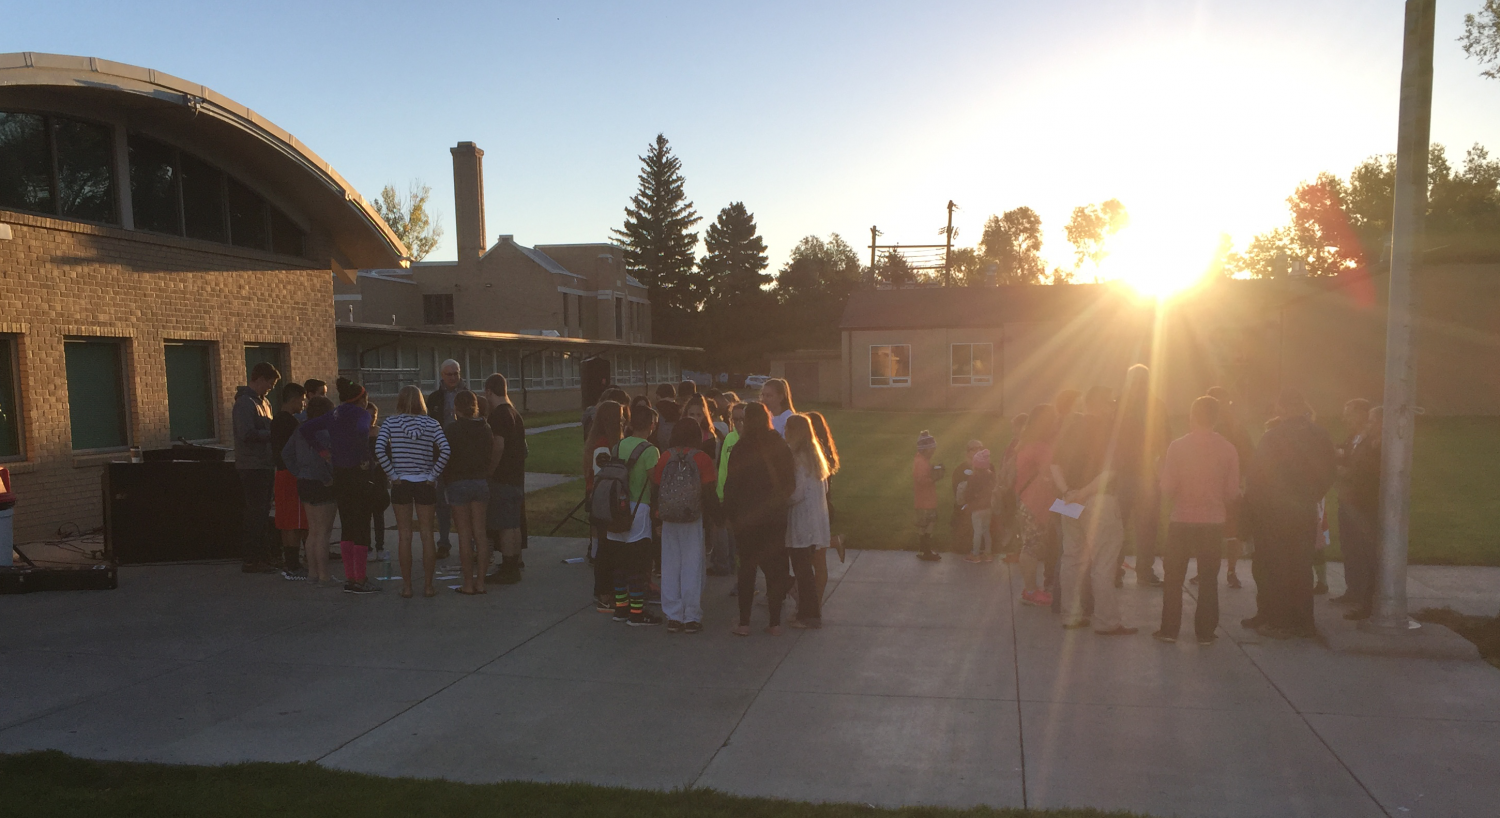 Students gather for See You at the Pole